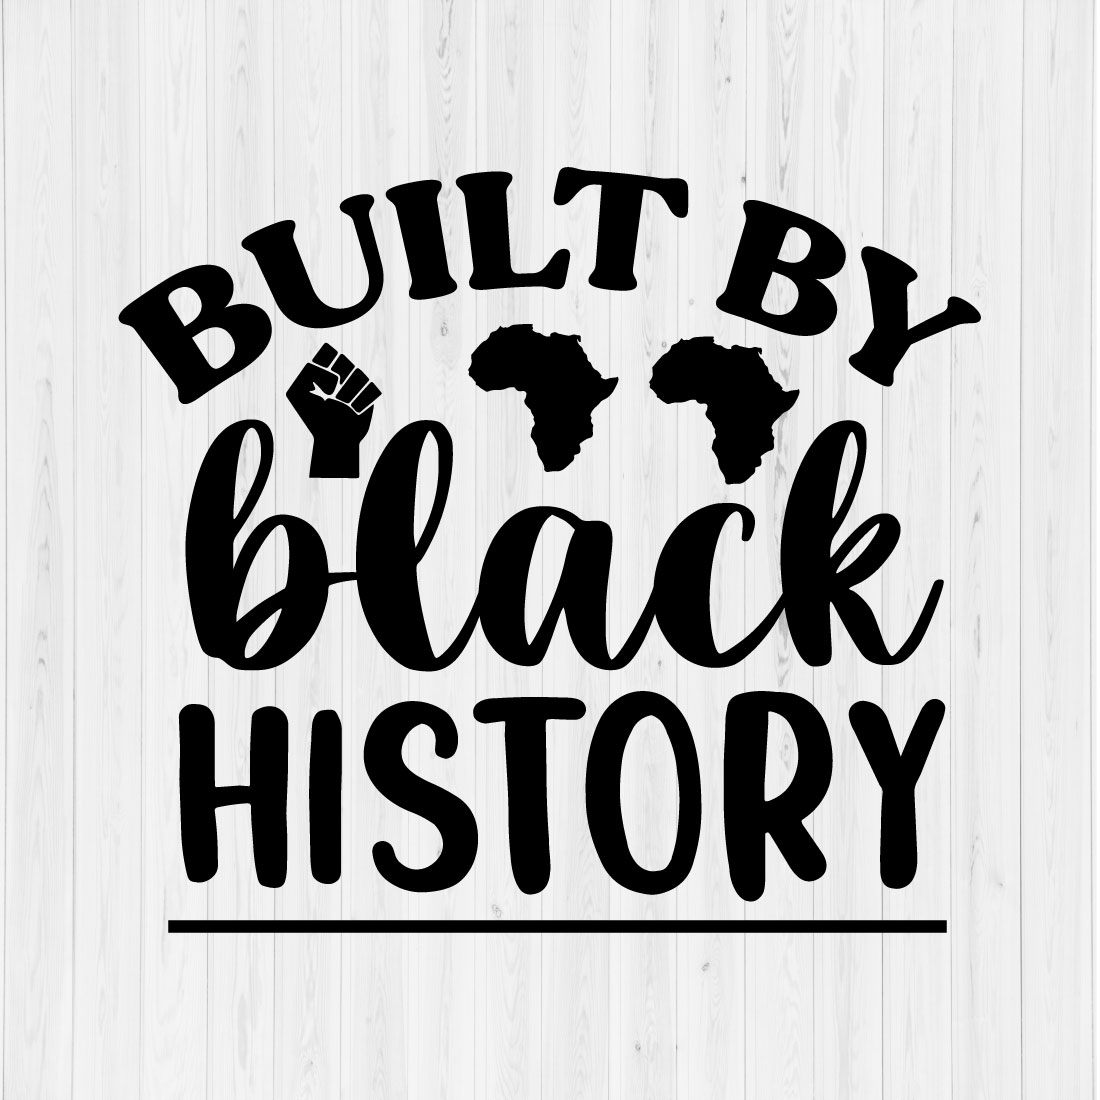 Built By Black History cover image.